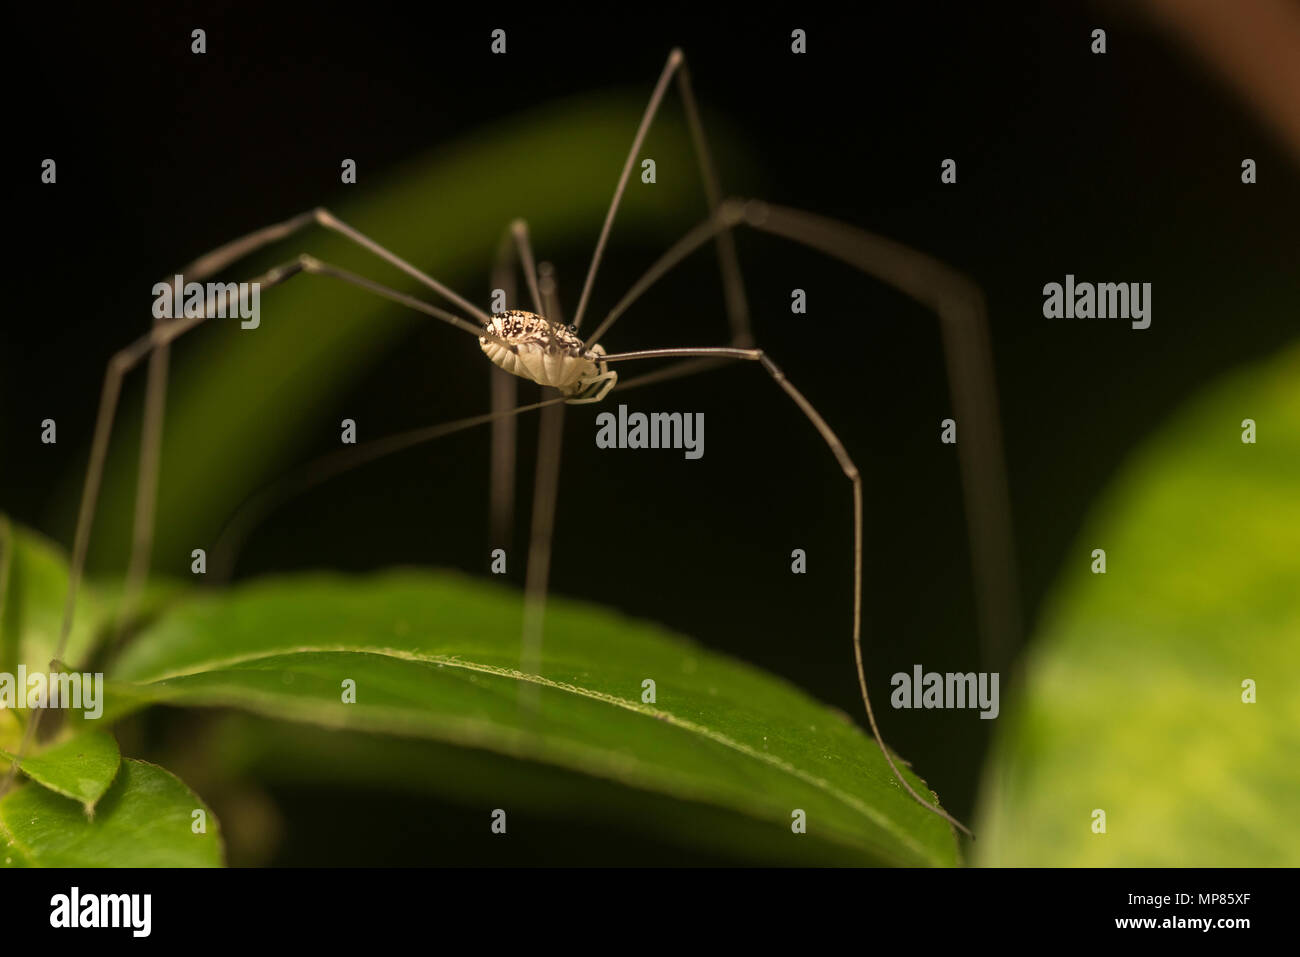 A daddy longlegs also known as a harvestman is a type of arachnid closely related to spiders. Stock Photo